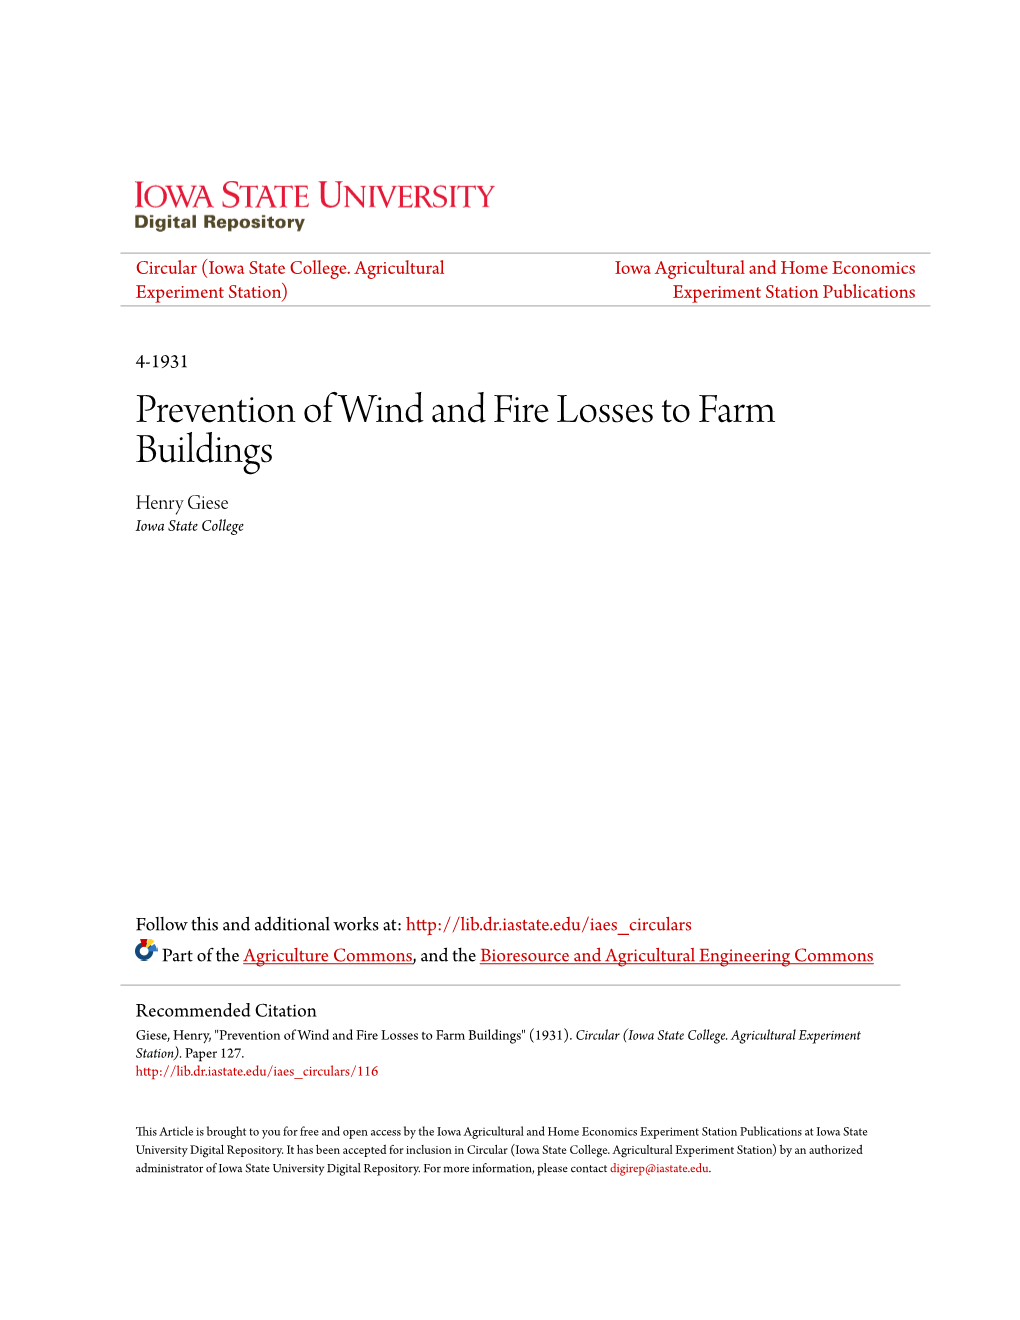 Prevention of Wind and Fire Losses to Farm Buildings Henry Giese Iowa State College